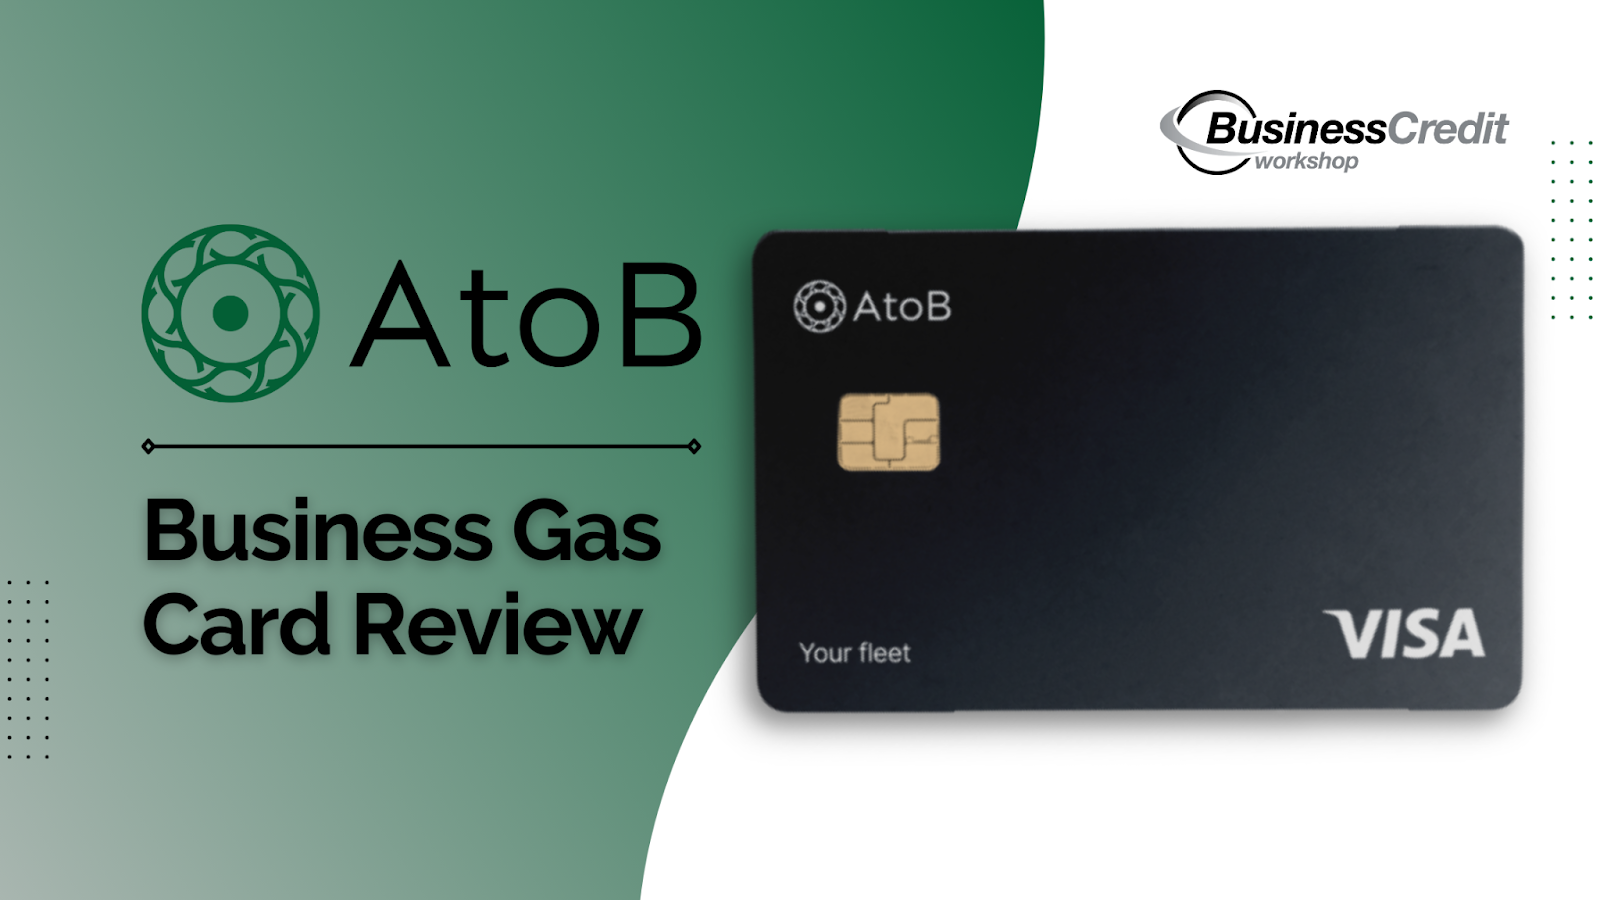 AtoB business gas card review